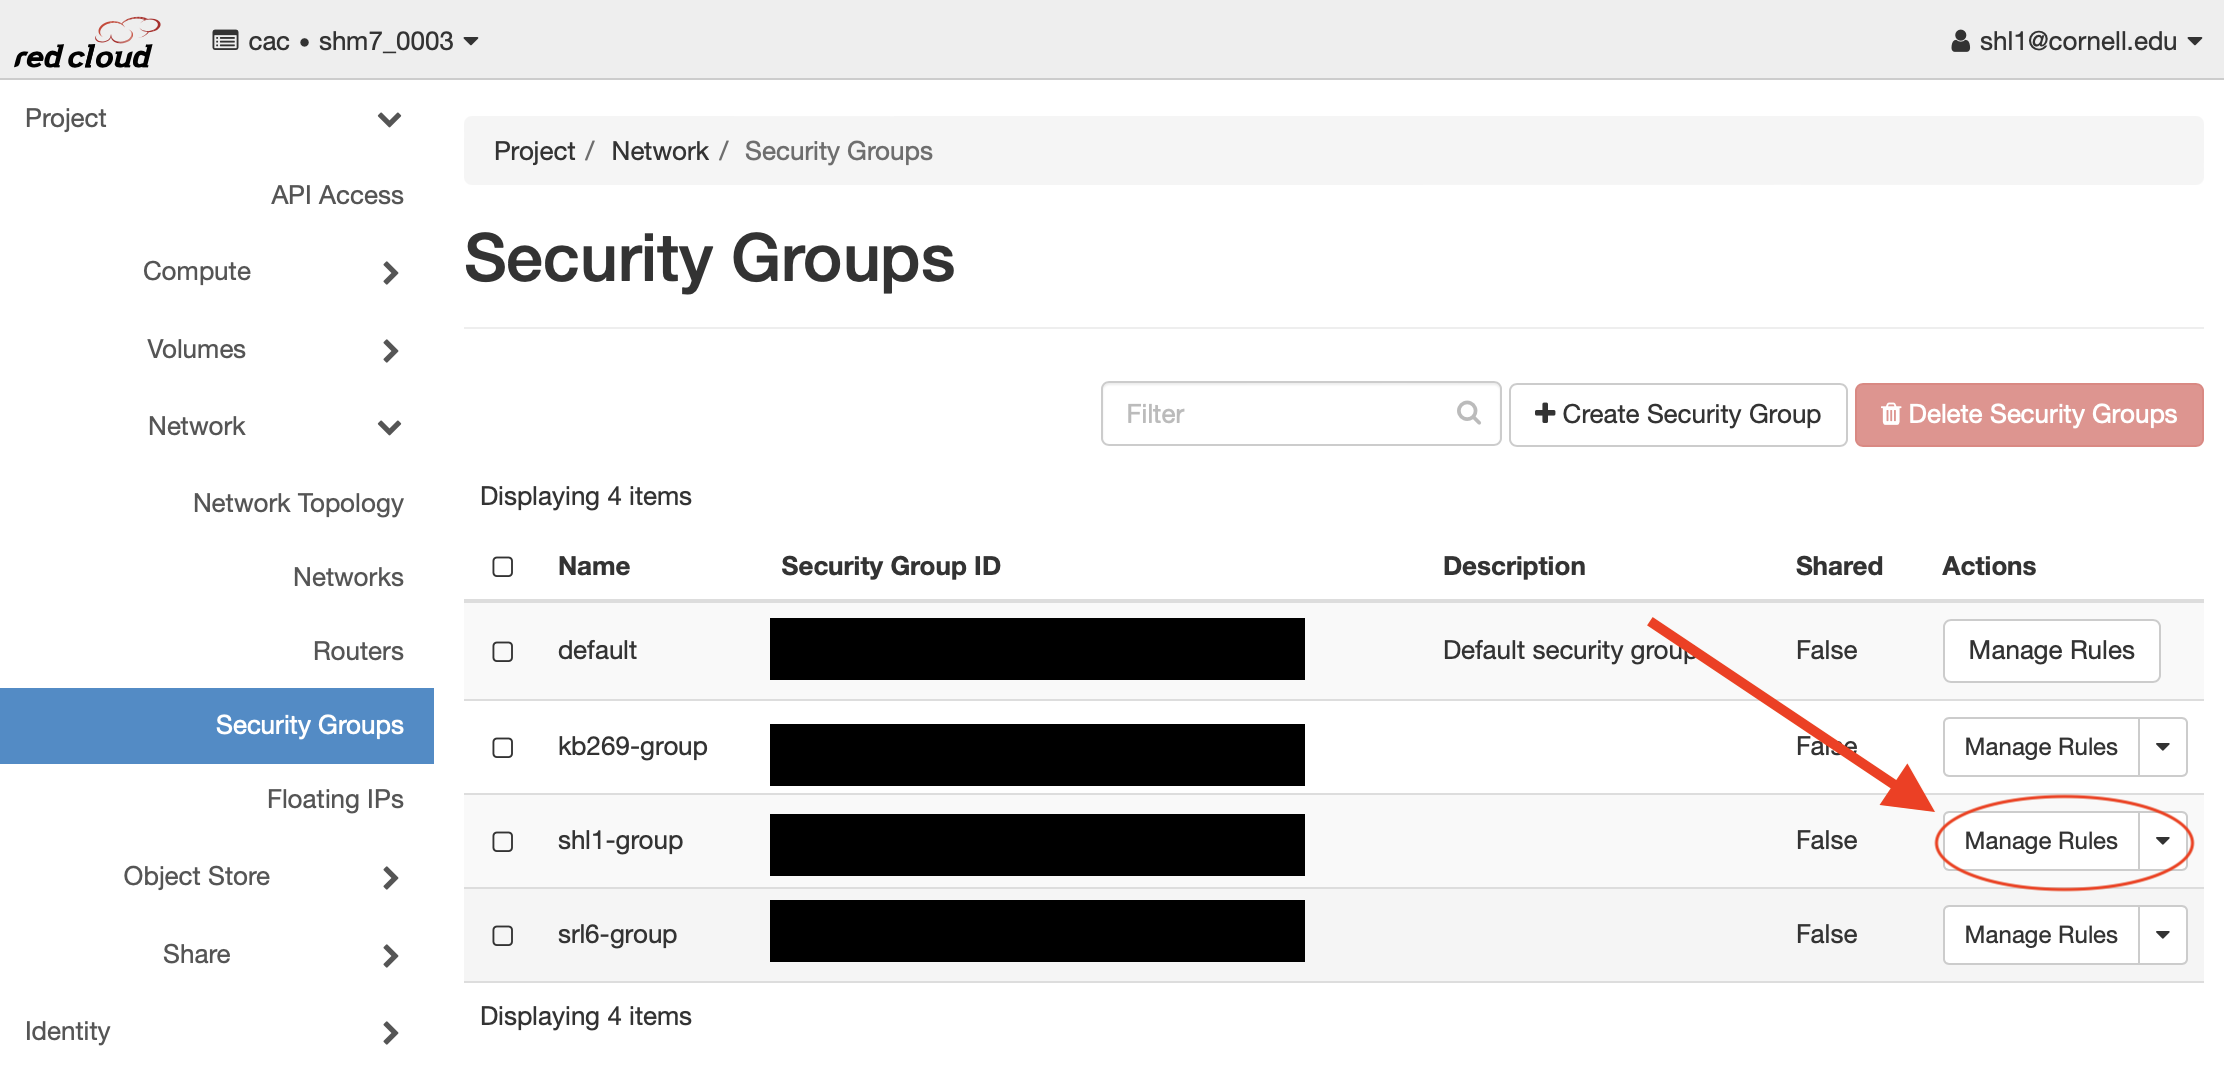 Select a Security Group